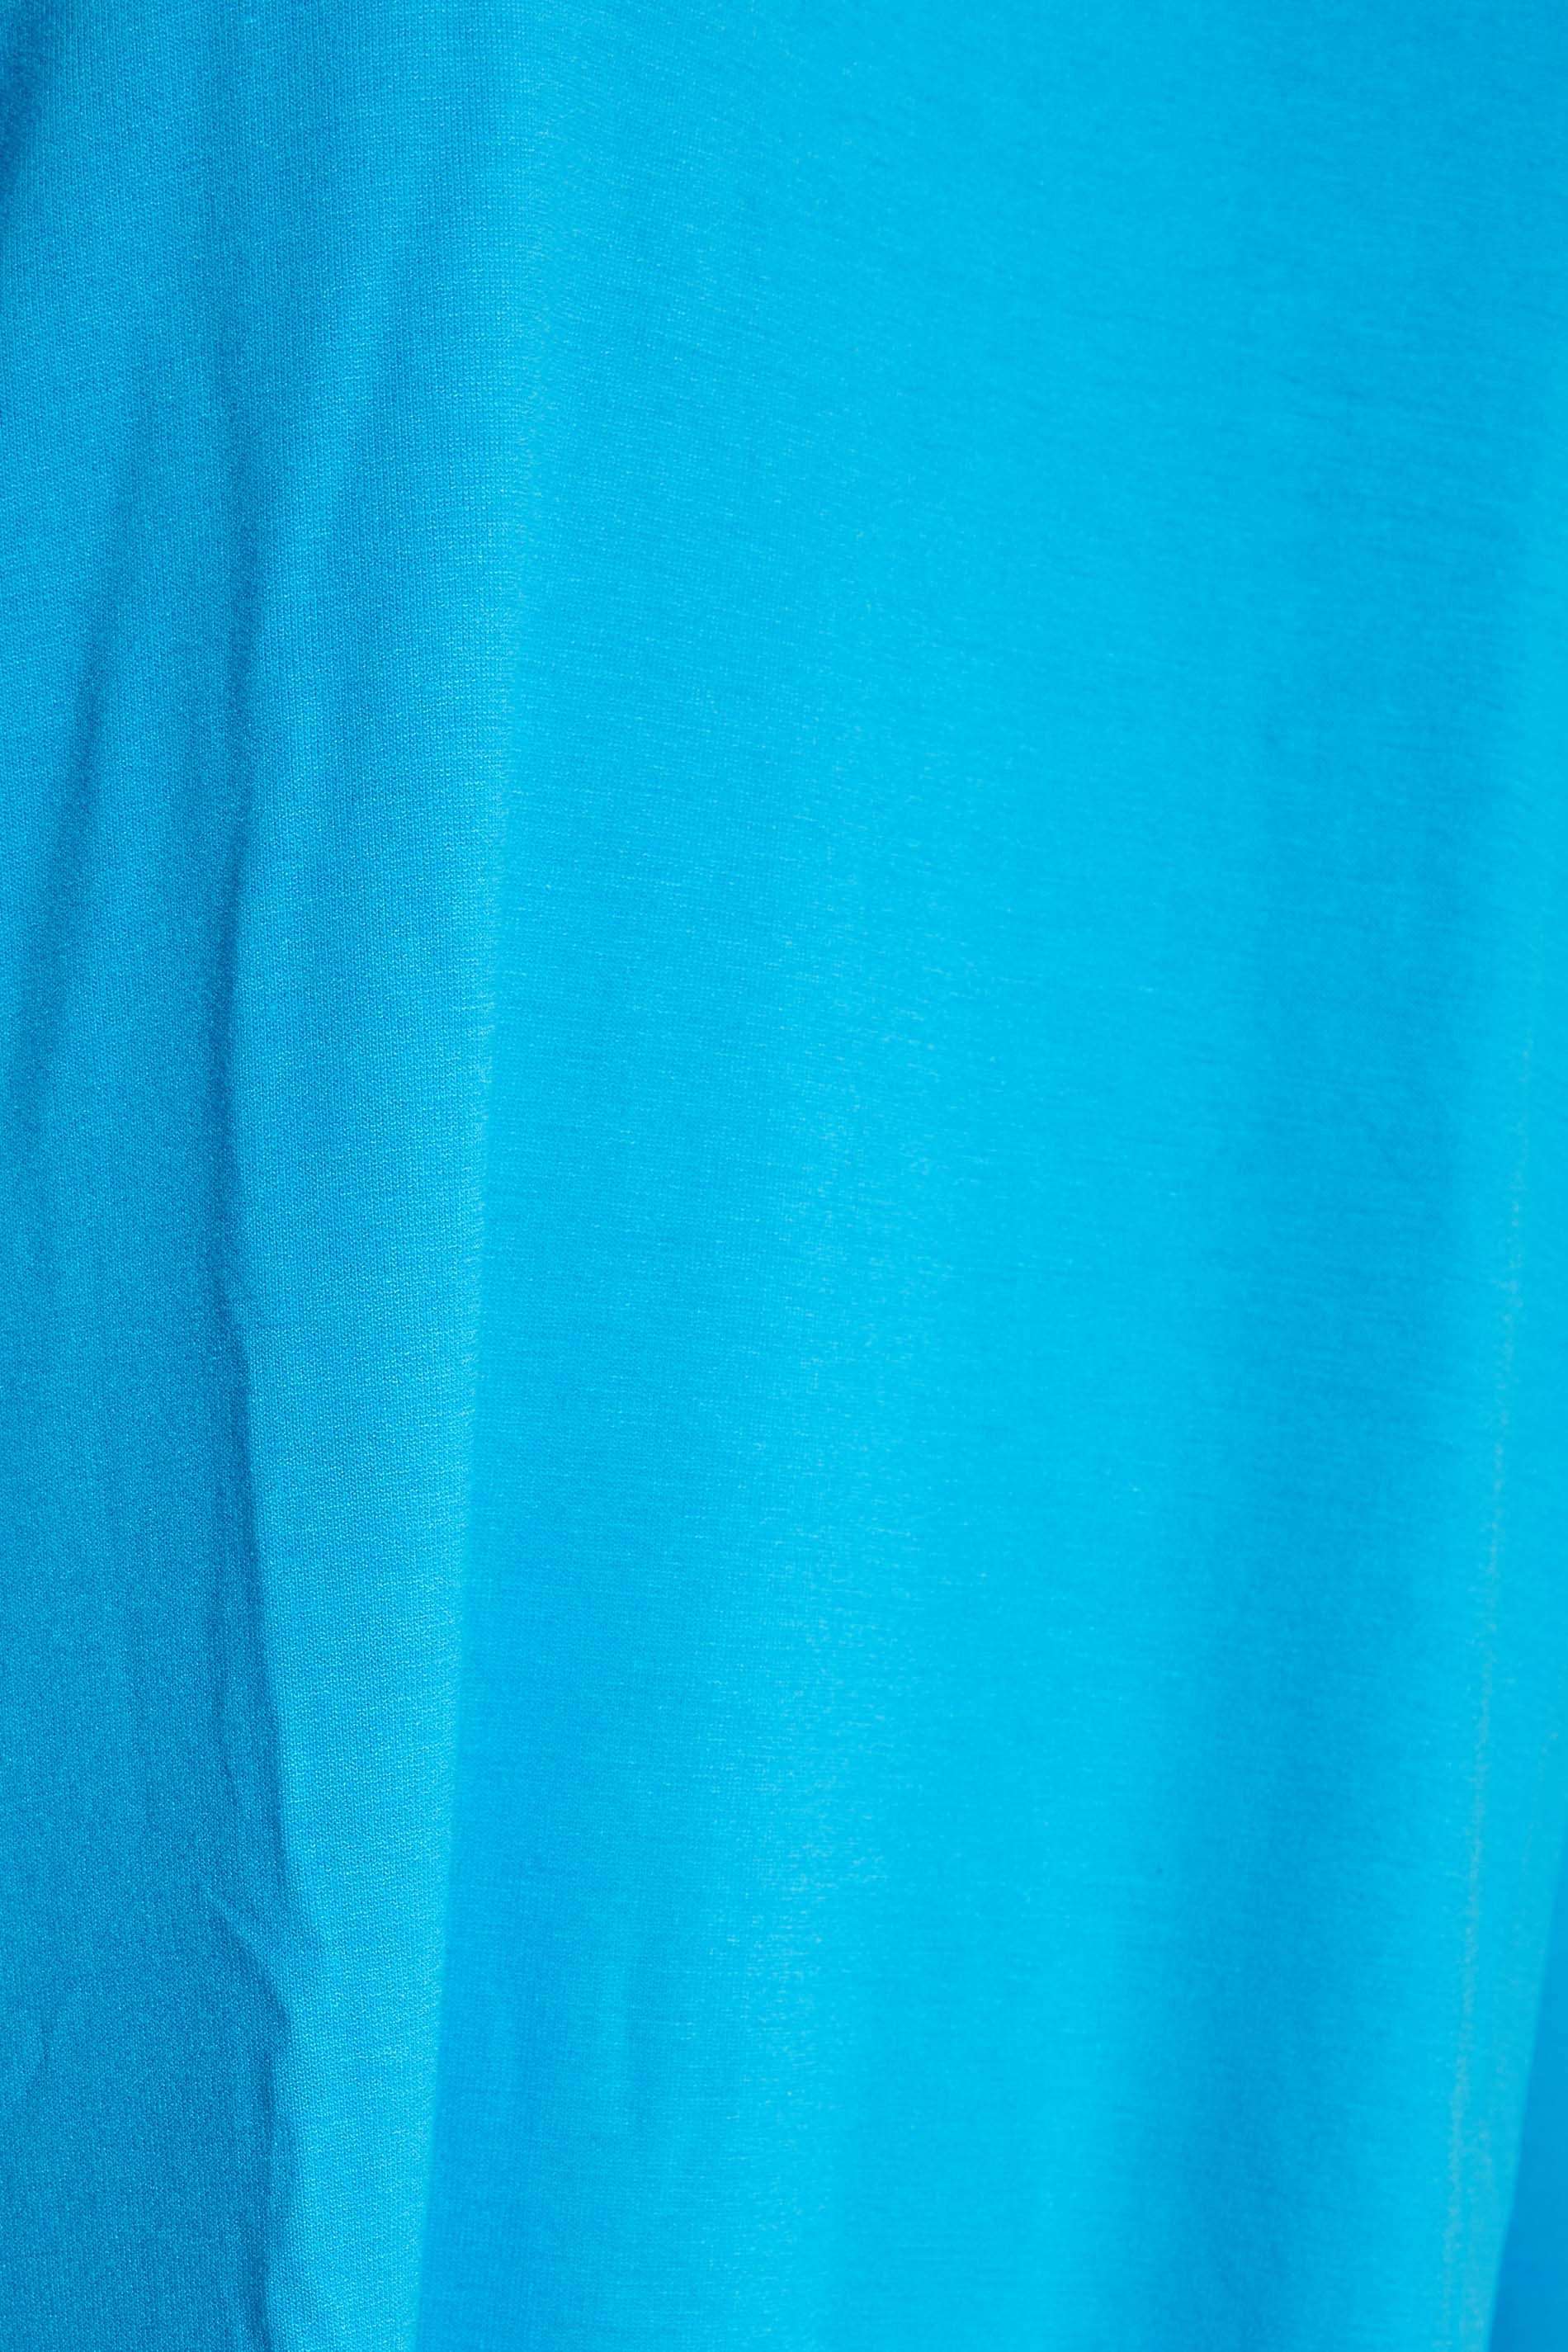 Grande taille  Tops Grande taille  Tops Ourlet Plongeant | LIMITED COLLECTION - T-Shirt Bleu Turquoise Manches Longues Ourlet Plongeant - DP02043